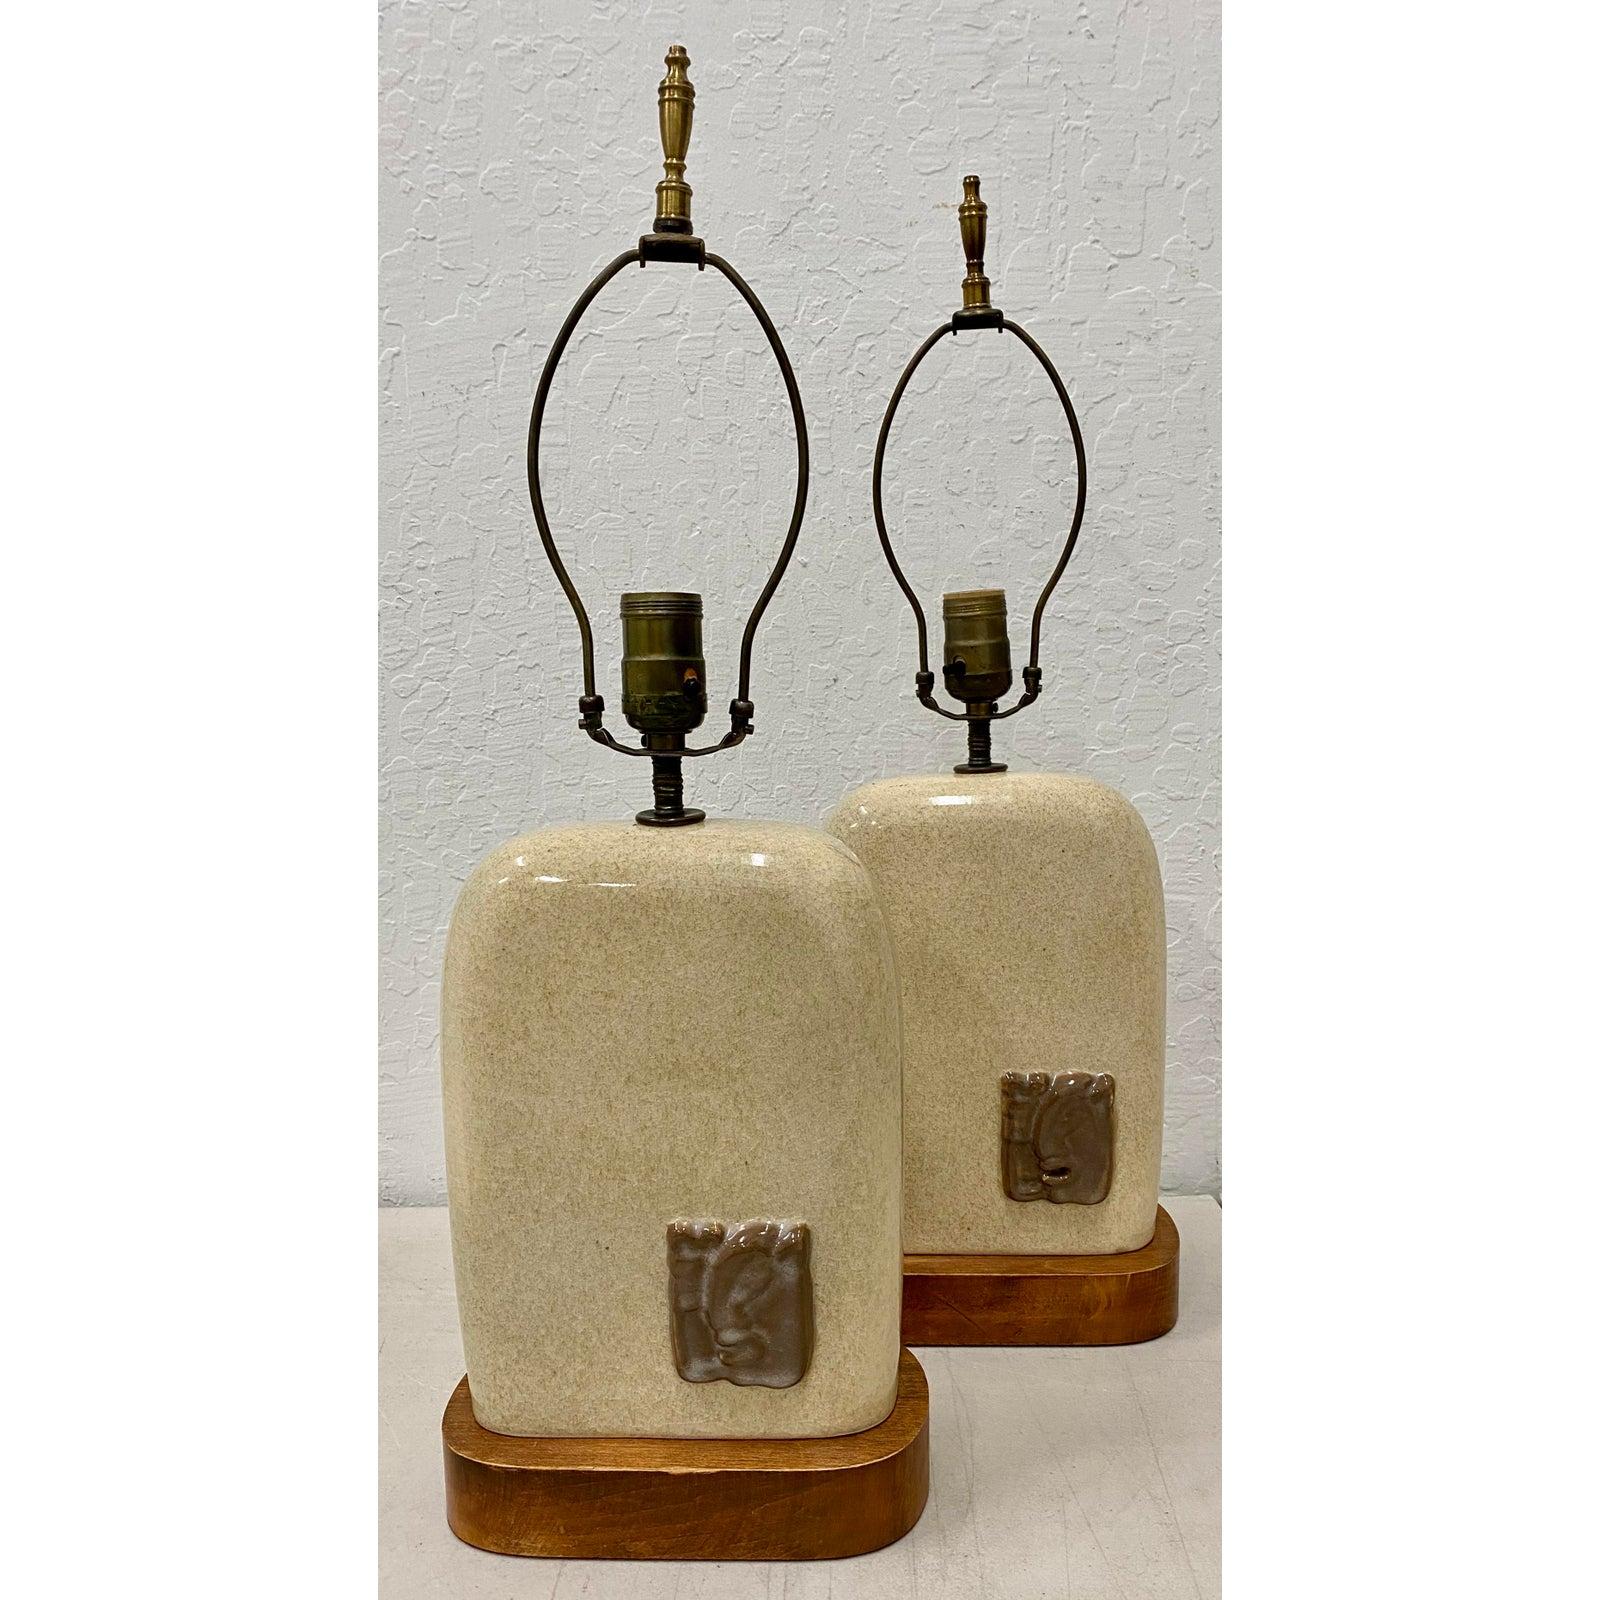 20th Century Pair of Vintage Glazed Ceramic Lamps with Mayan Inspired Ceramic Medallions